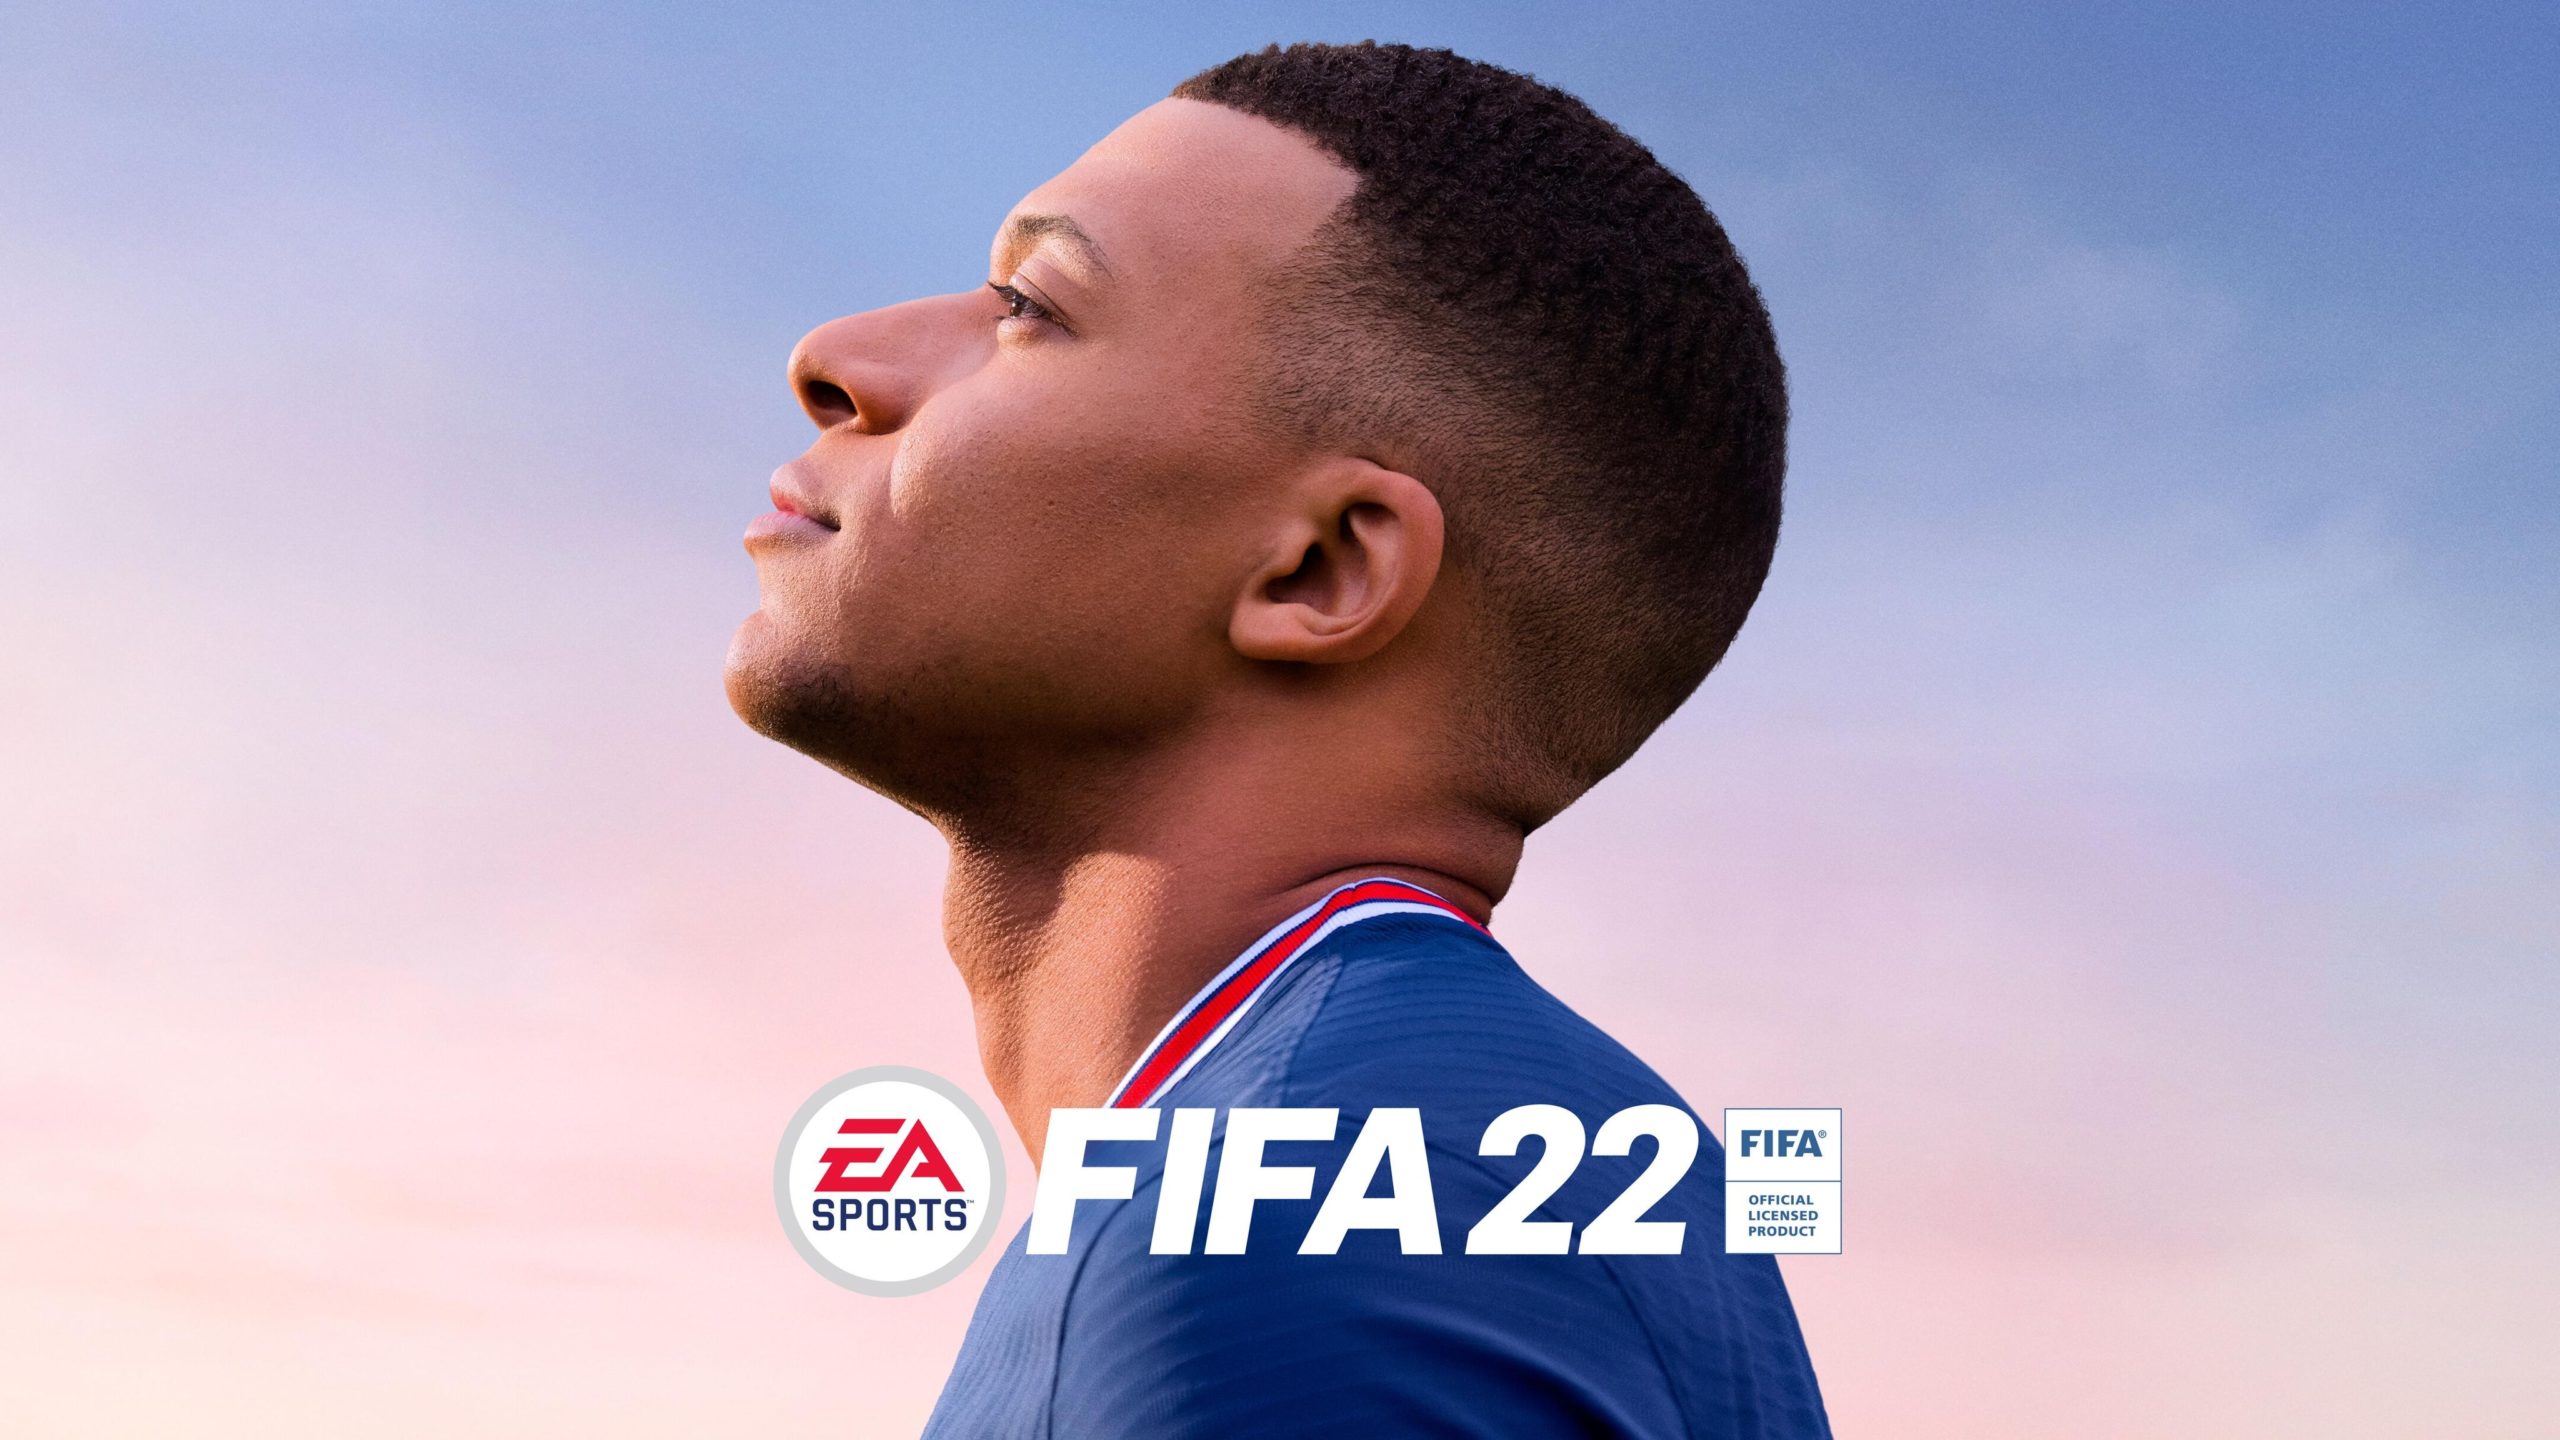 EA Has Delisted All But Two FIFA Games On Game Storefronts - Gameranx